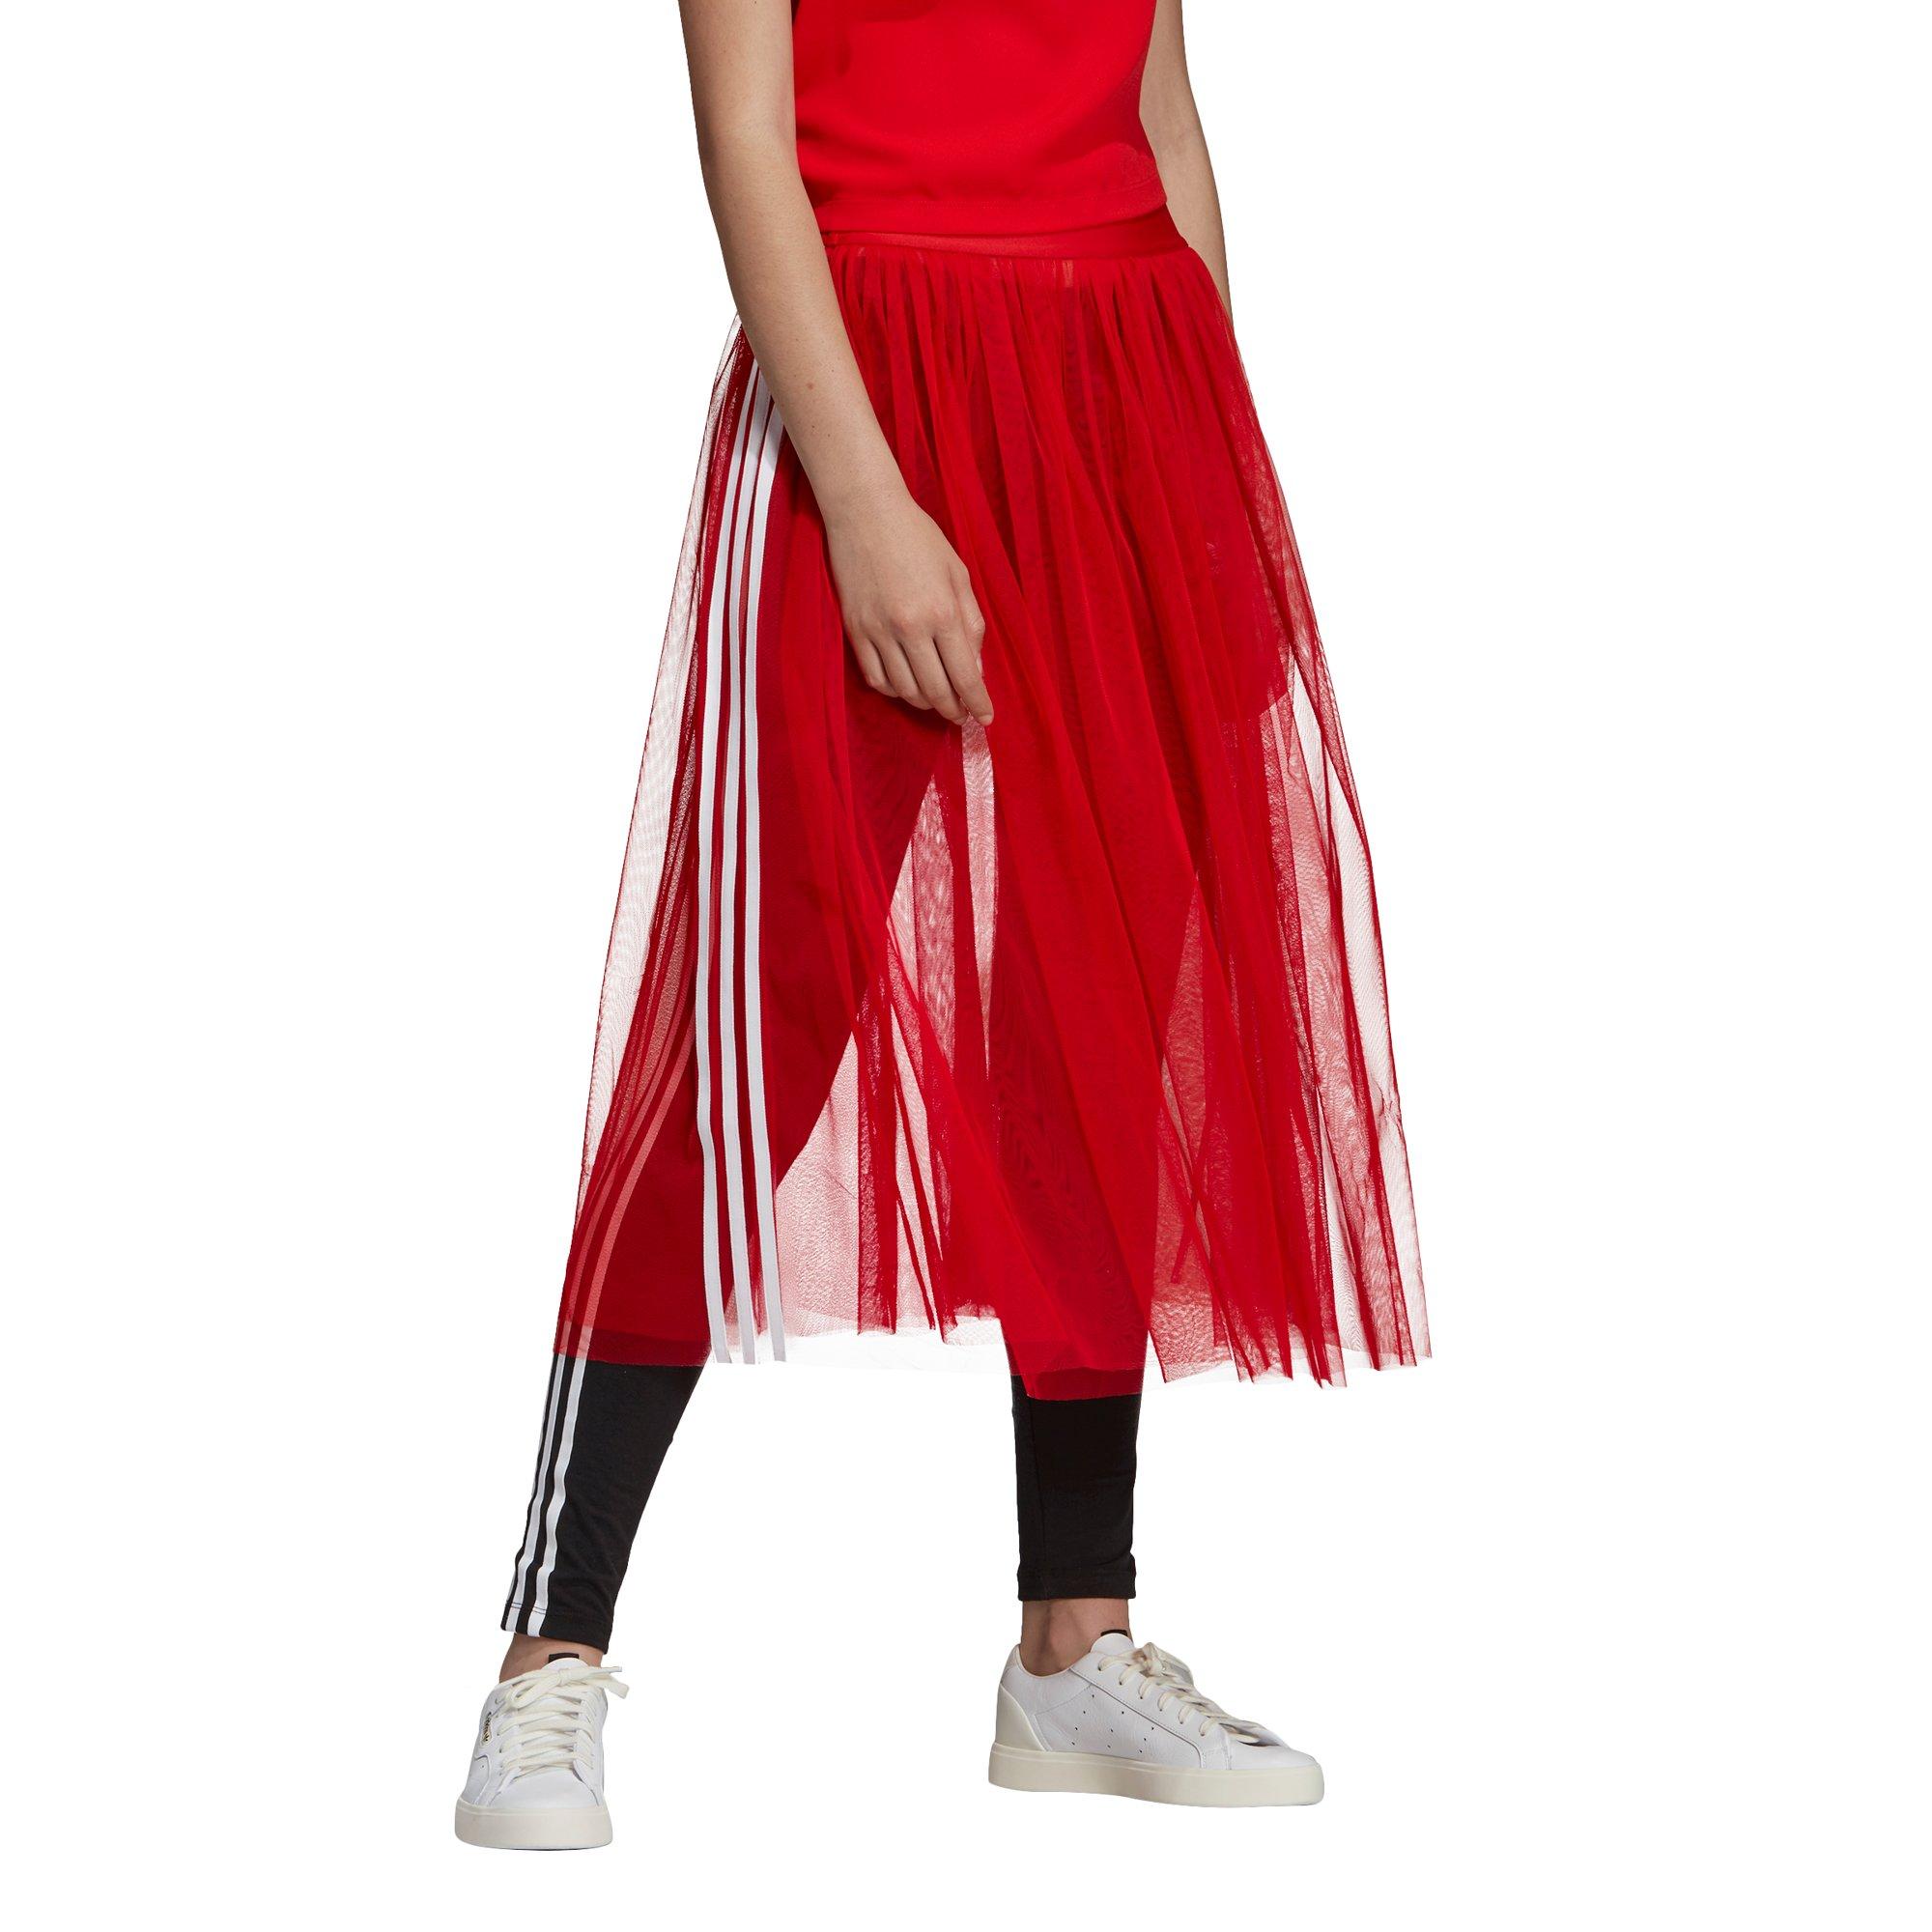 adidas tulle skirt red